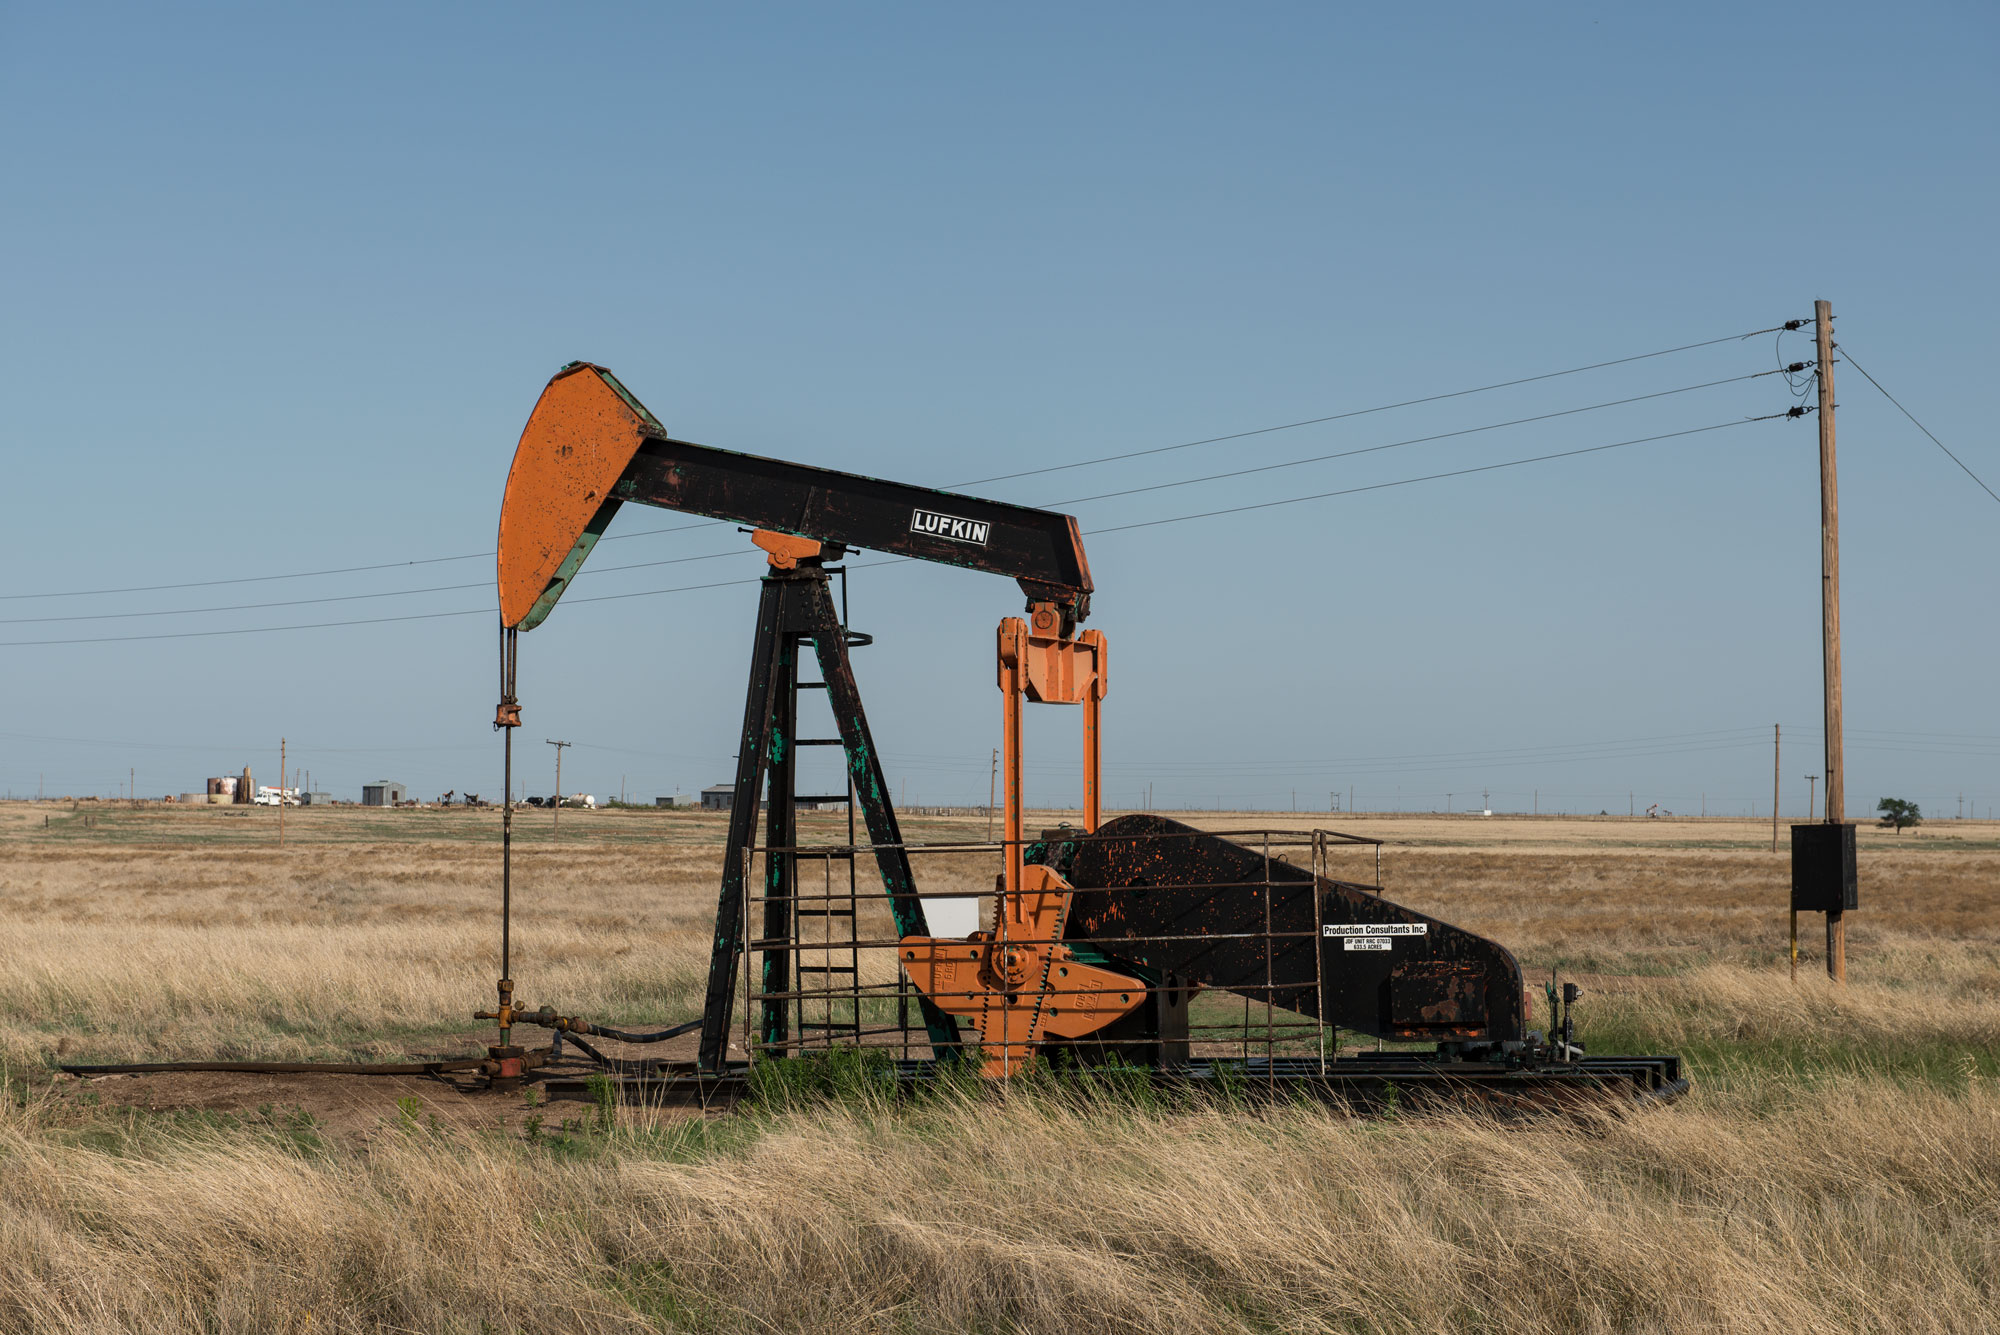 A photograph of a black and orange pumpjack in a field of dry grass.